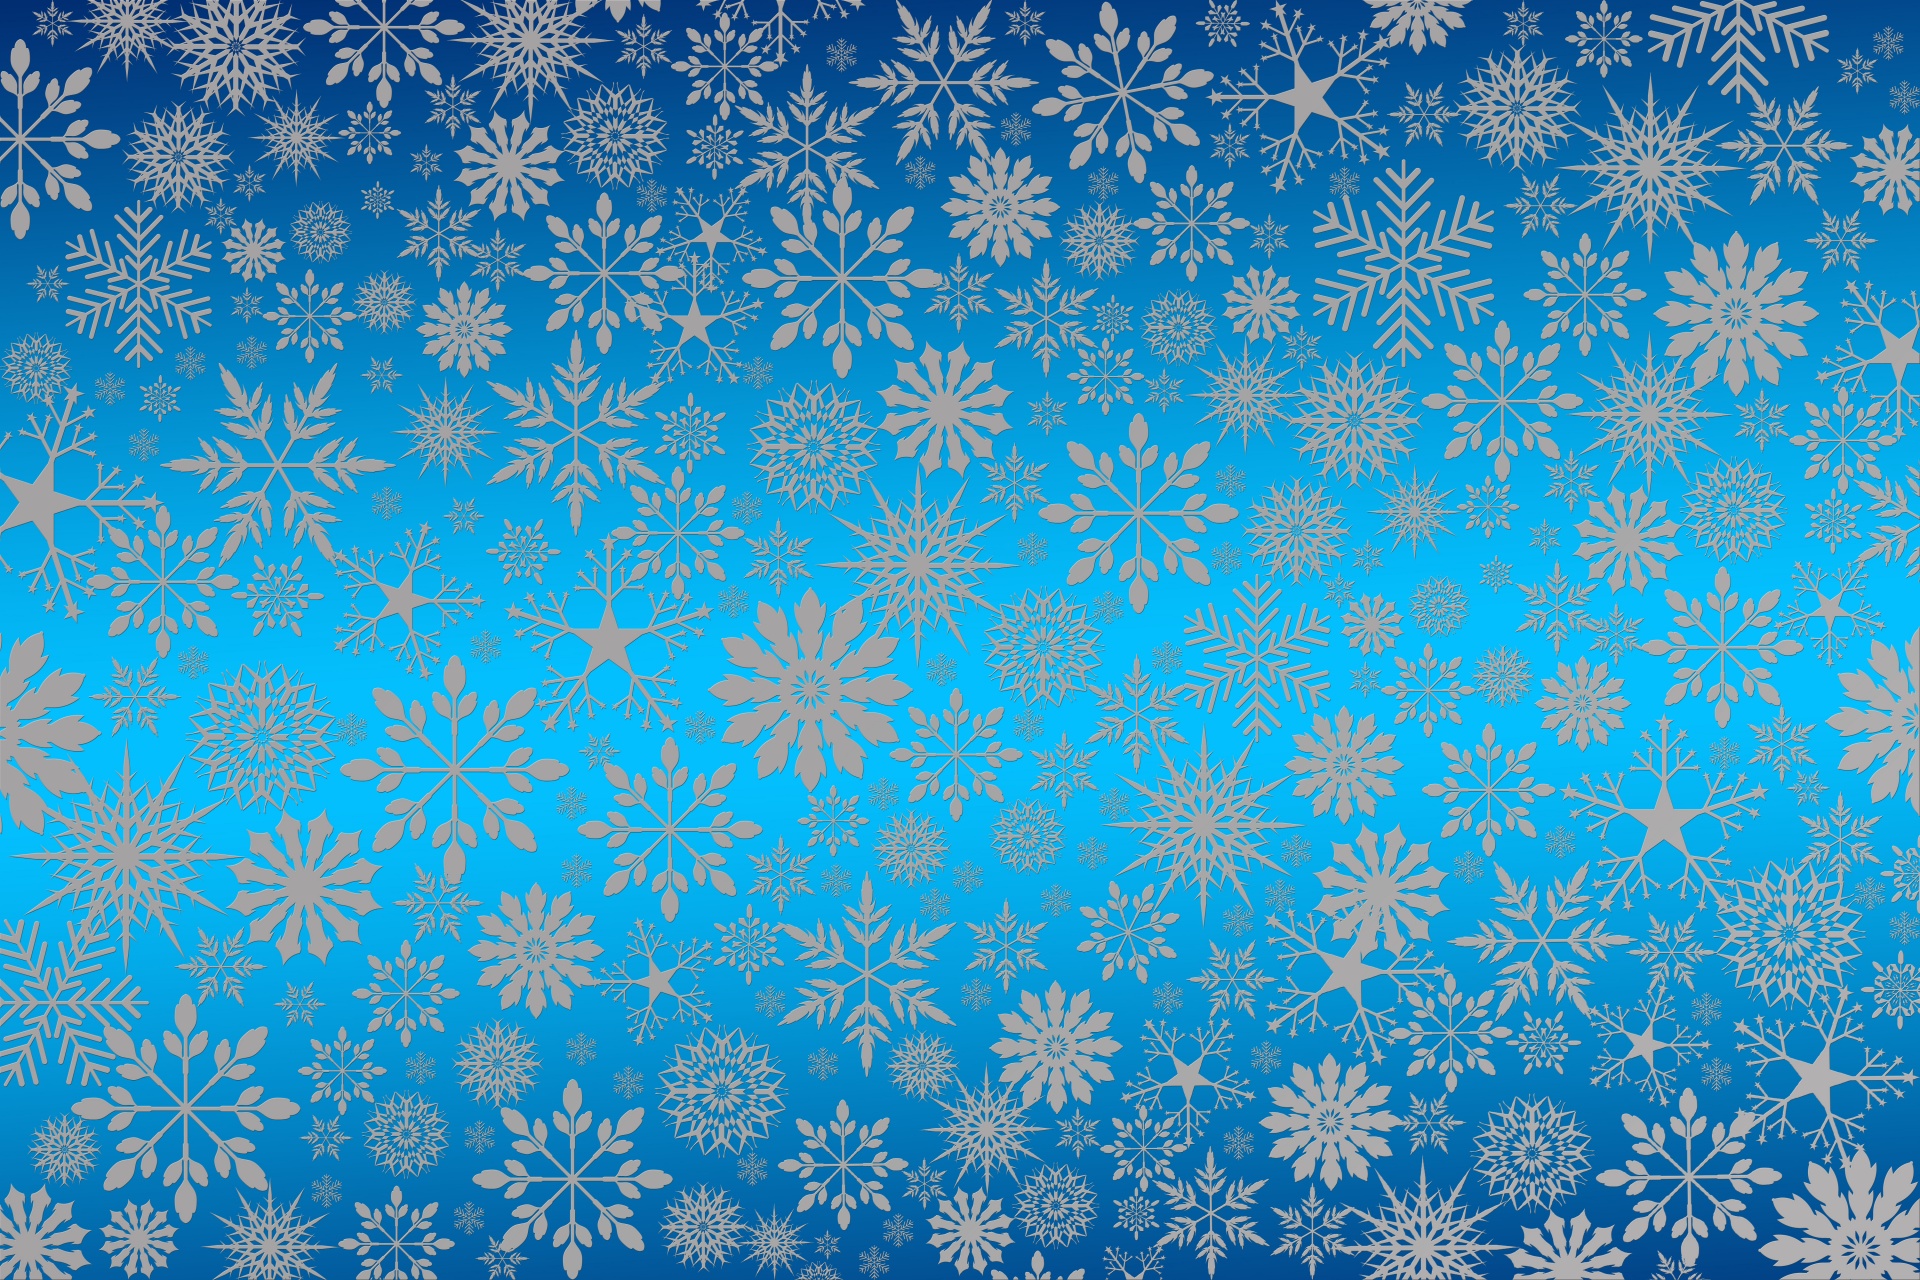 Abstract snowflakes and ice crystals